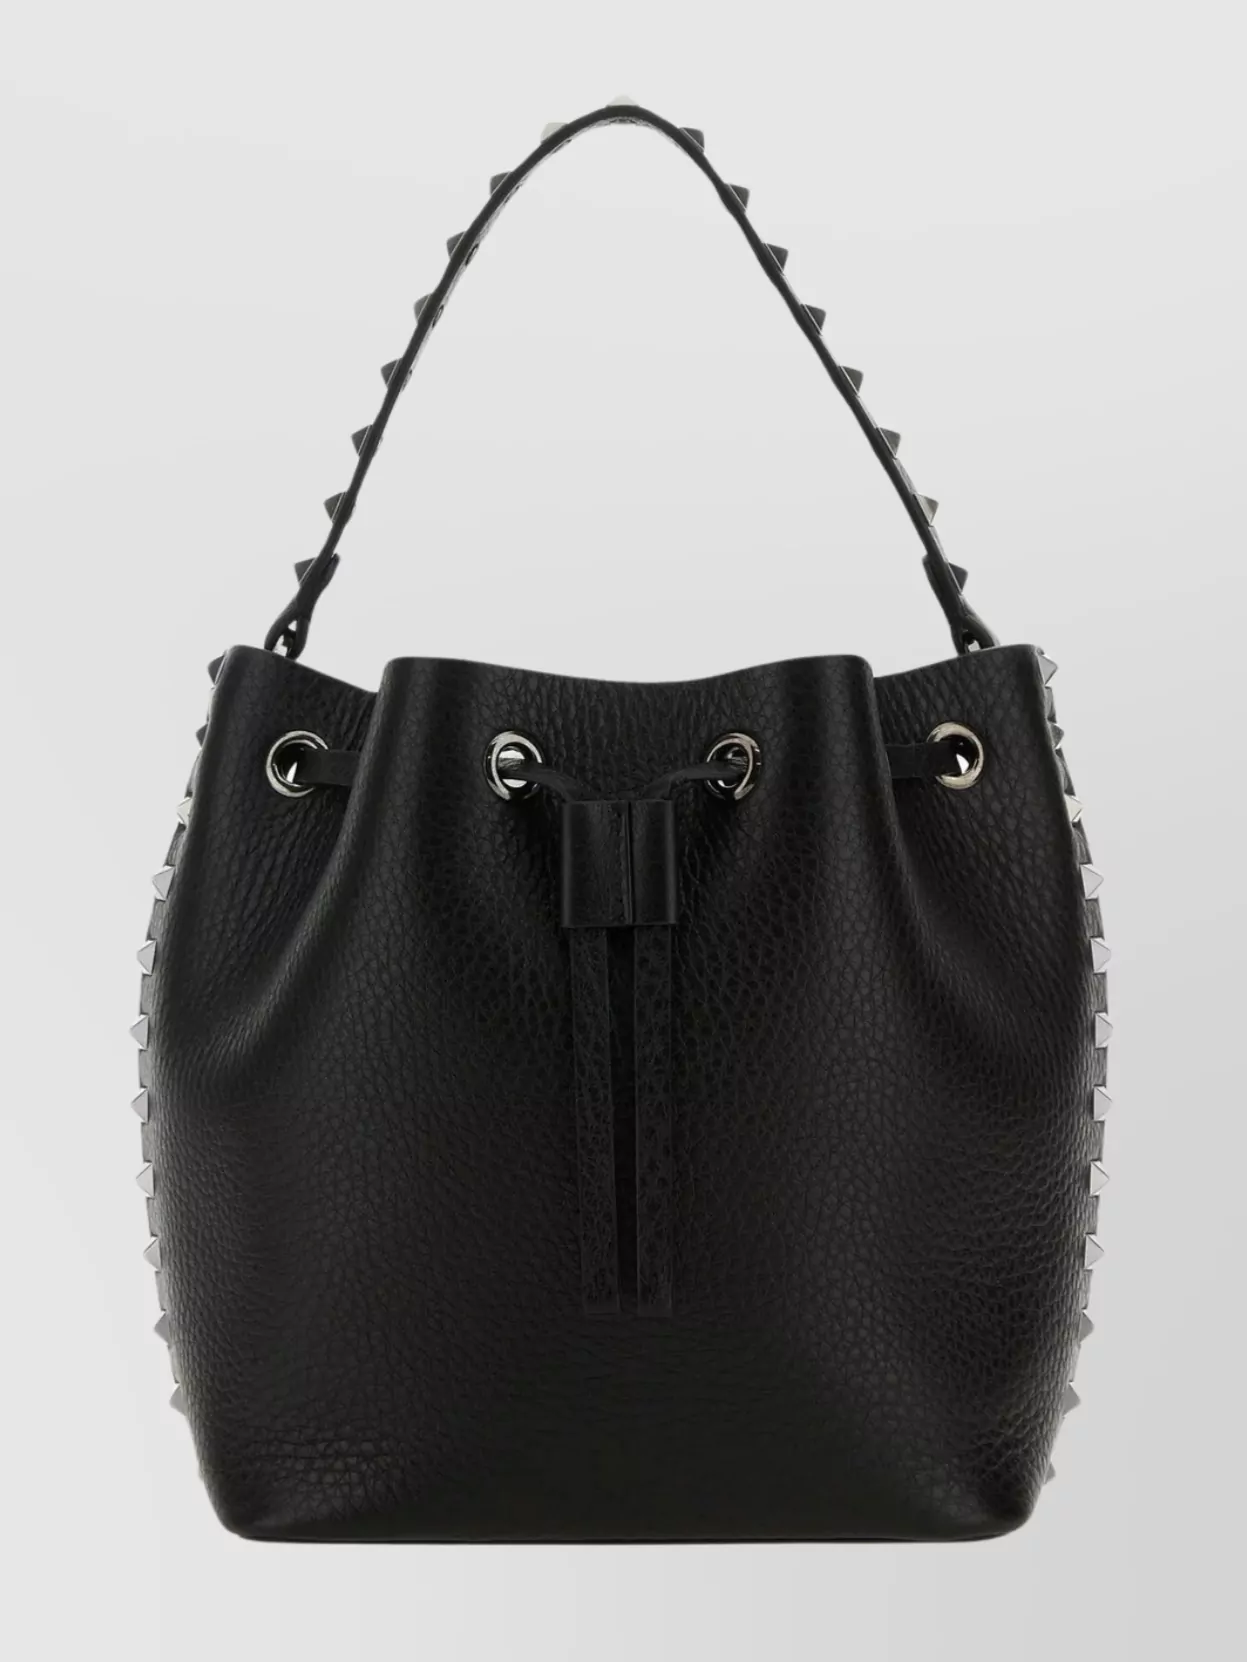 Shop Valentino Leather Bucket Bag Featuring Rockstud Accents